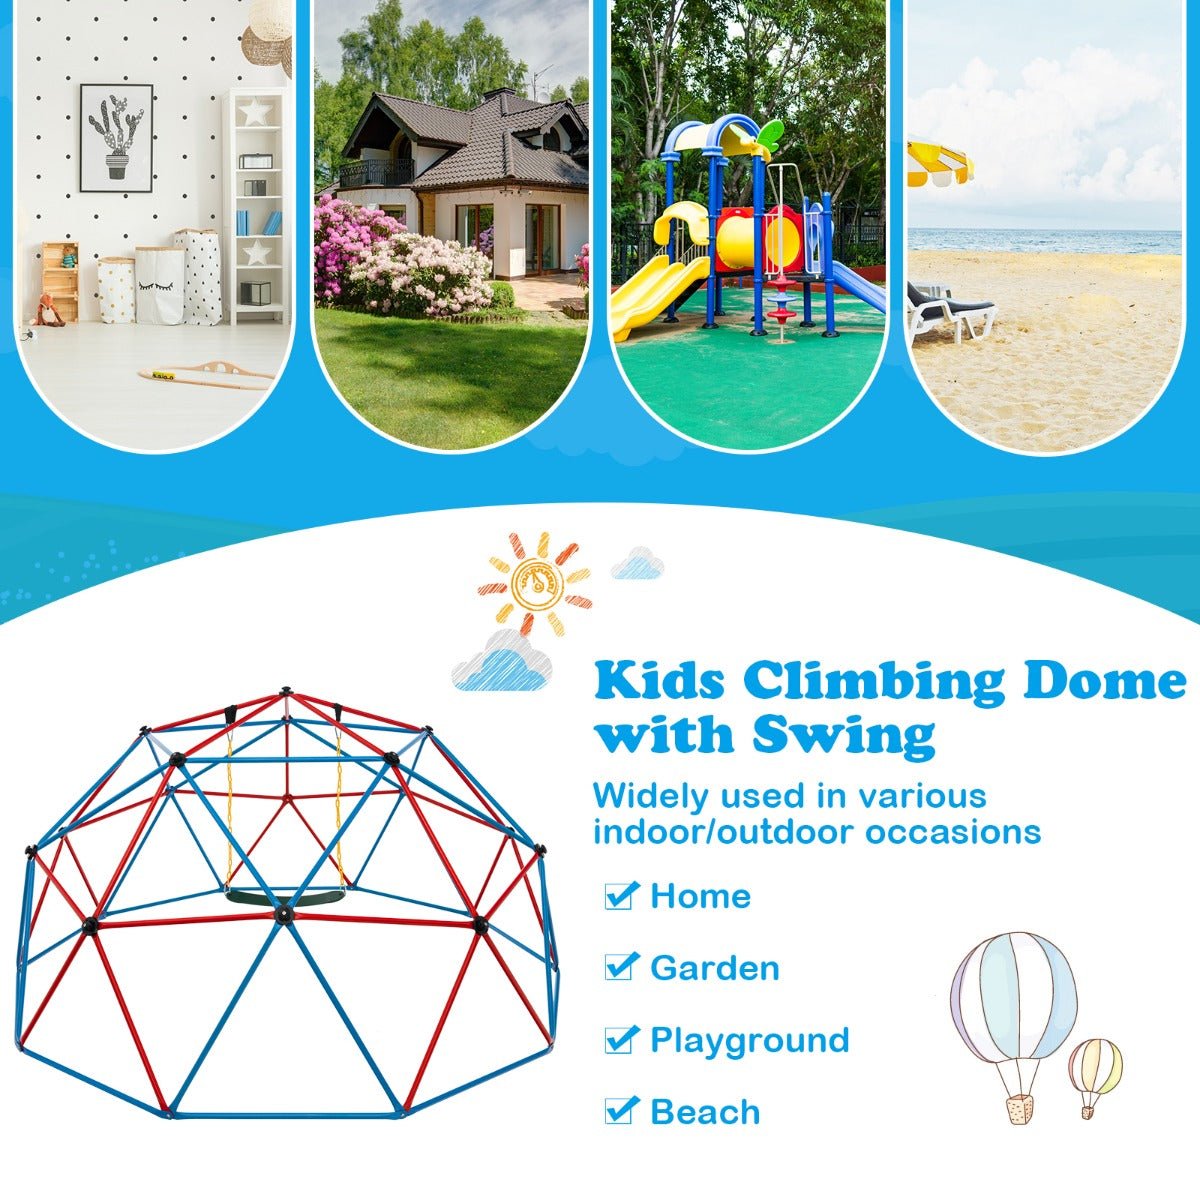 Geometric Dome Climber and Swing Set - 3m of Fun for Kids